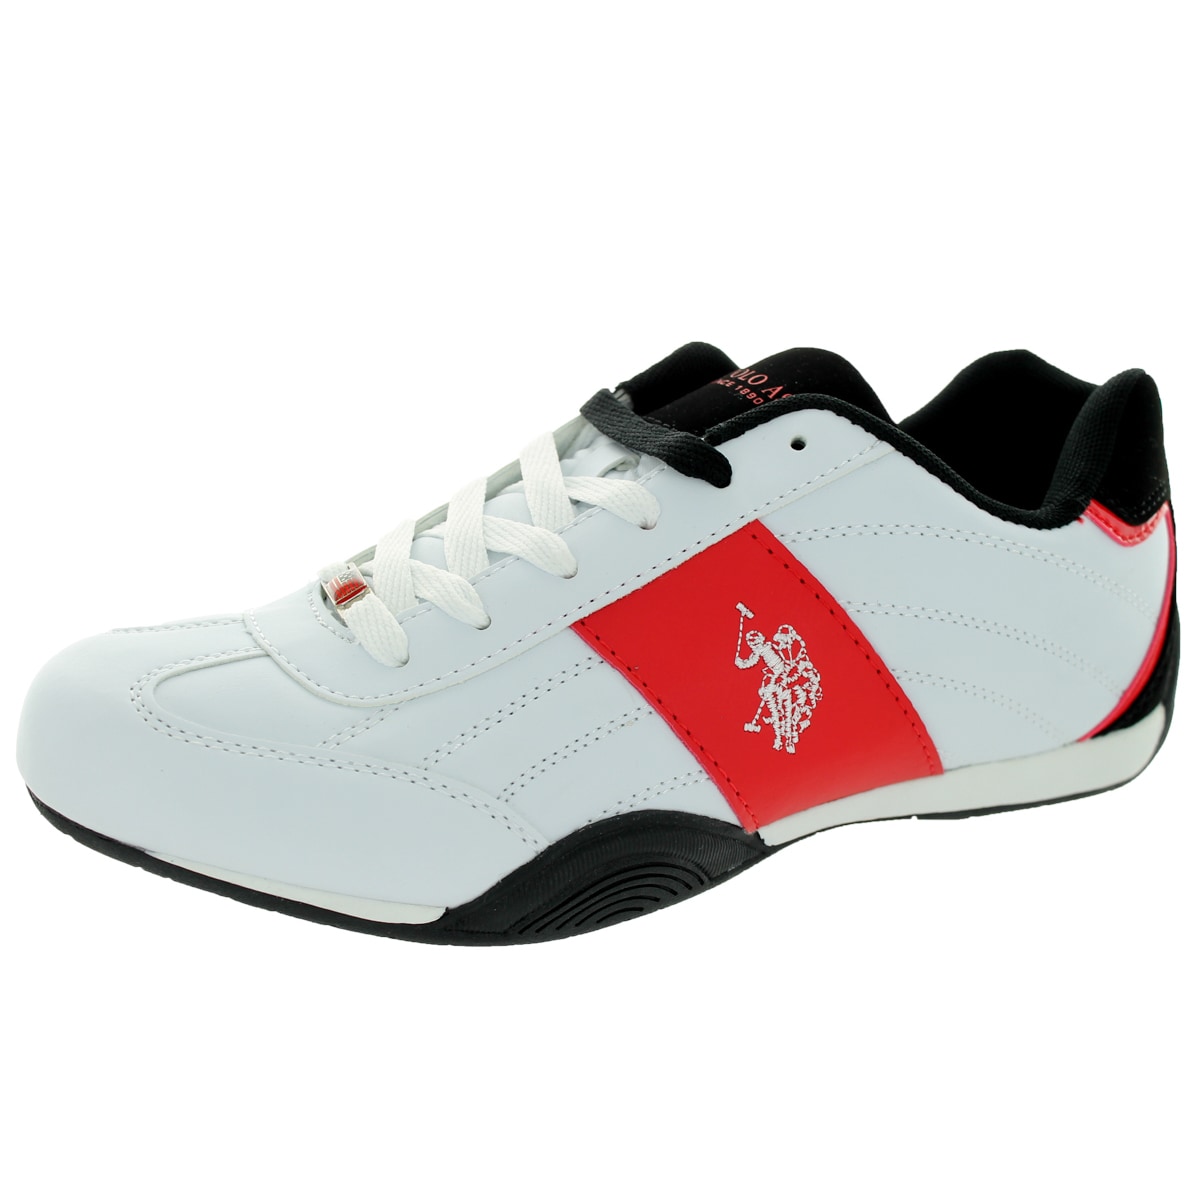 red polo tennis shoes